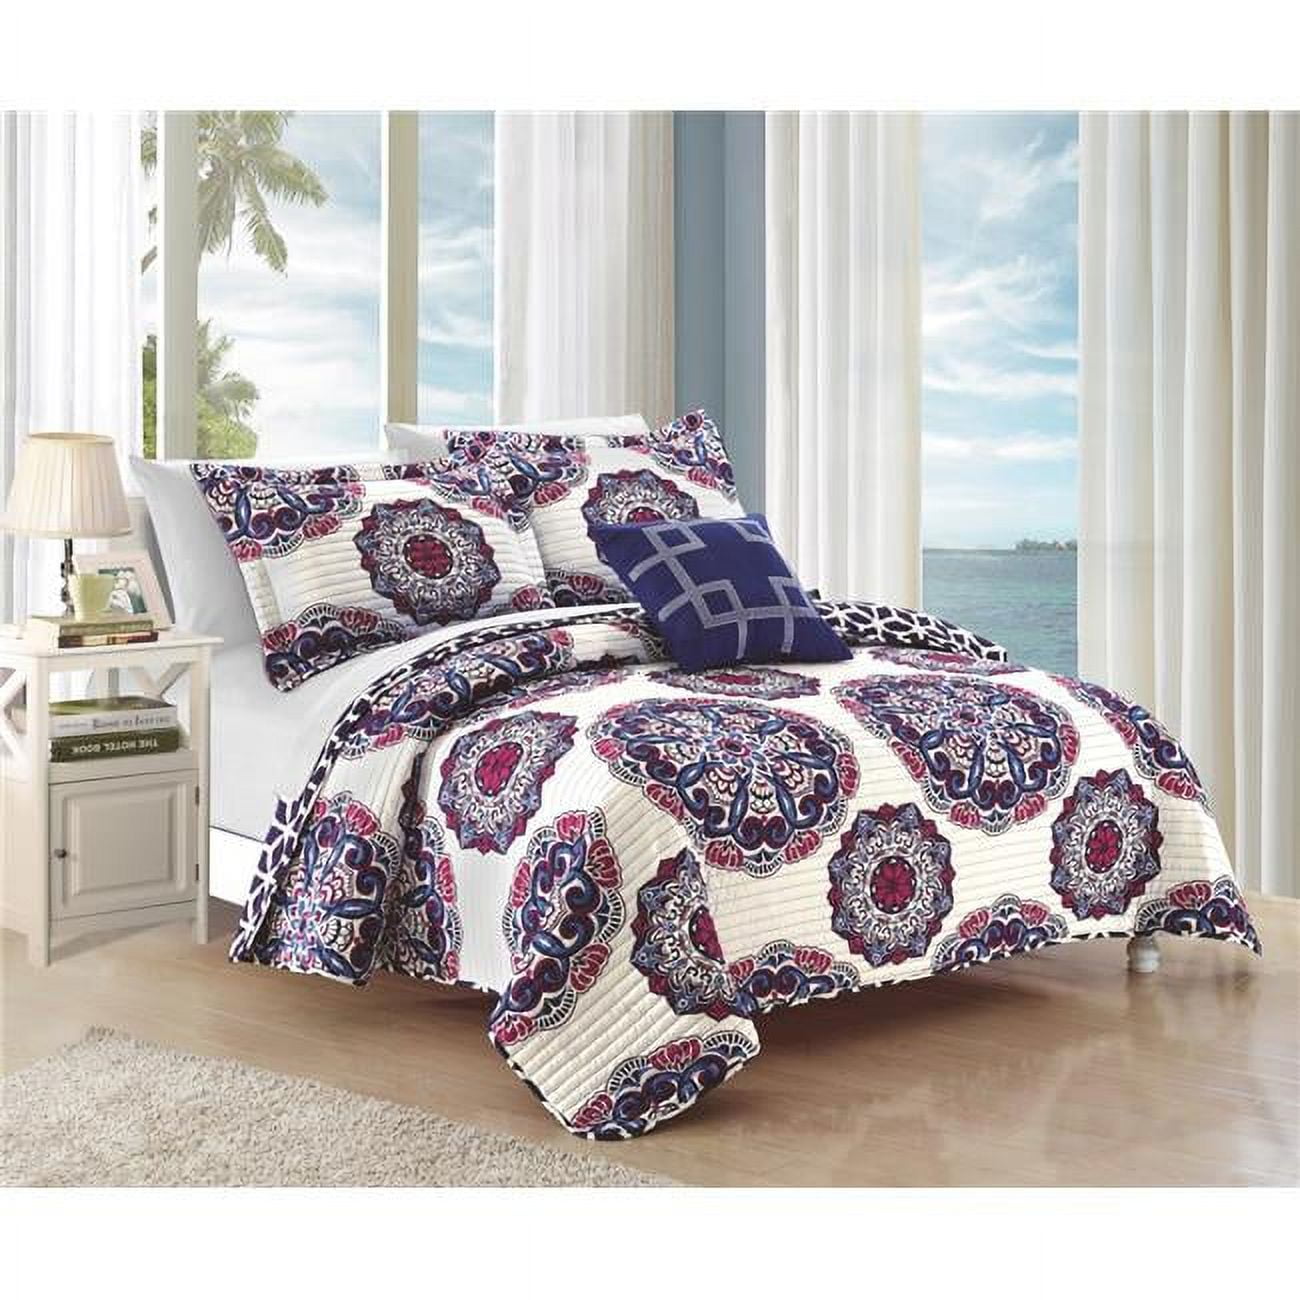 8 Piece Madarcos Super Soft Microfiber Large Printed Medallion Reversible With Geometric Printed Backing King Quilt Set, Navy With Sheet Set